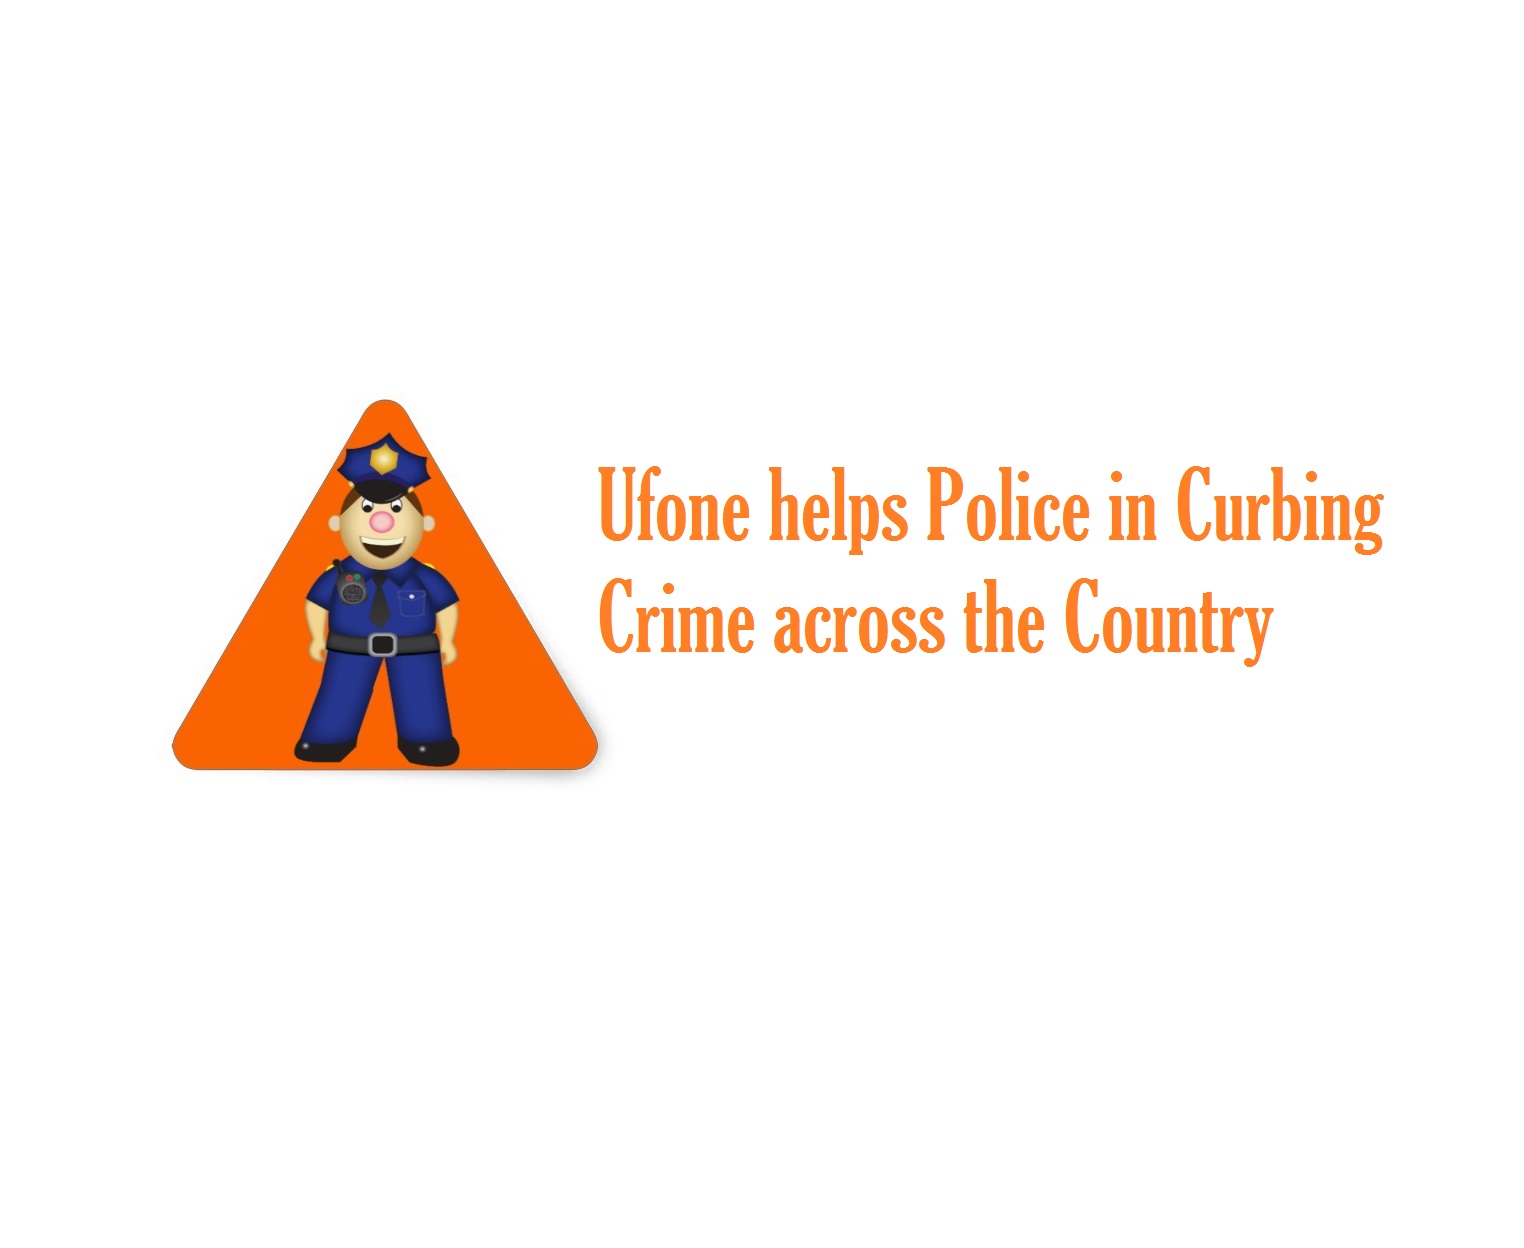 Ufone helps Police in Curbing Crime across the Country